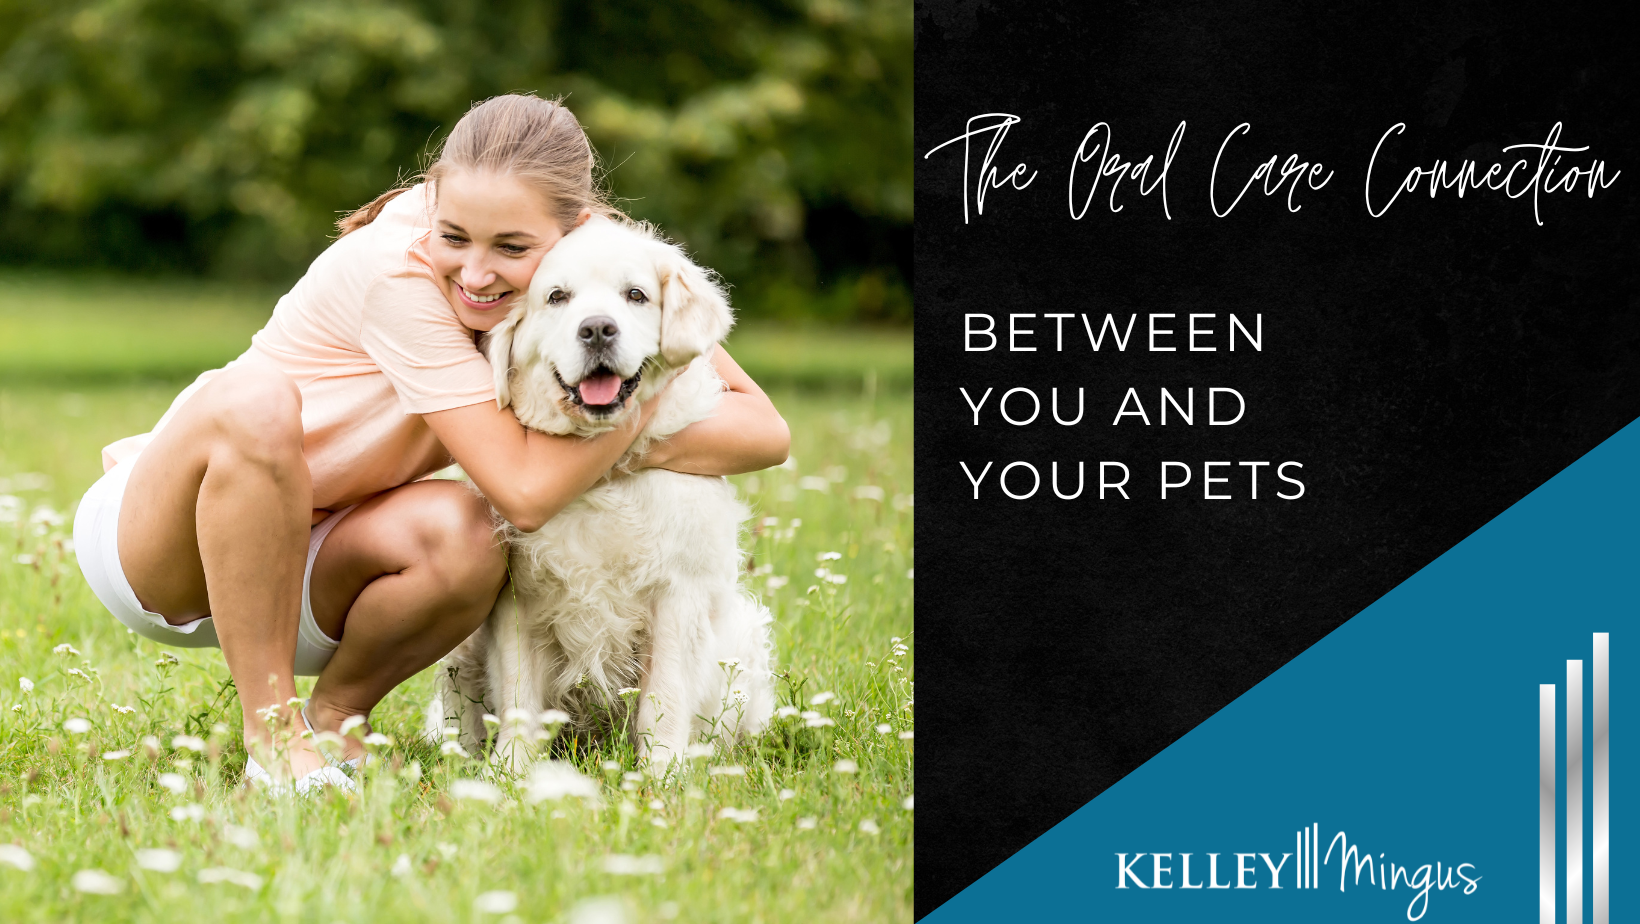 A smiling woman hugging a large fluffy dog in a grassy field, next to a graphic with text "the pet connection" and a logo for "kelley mingus.